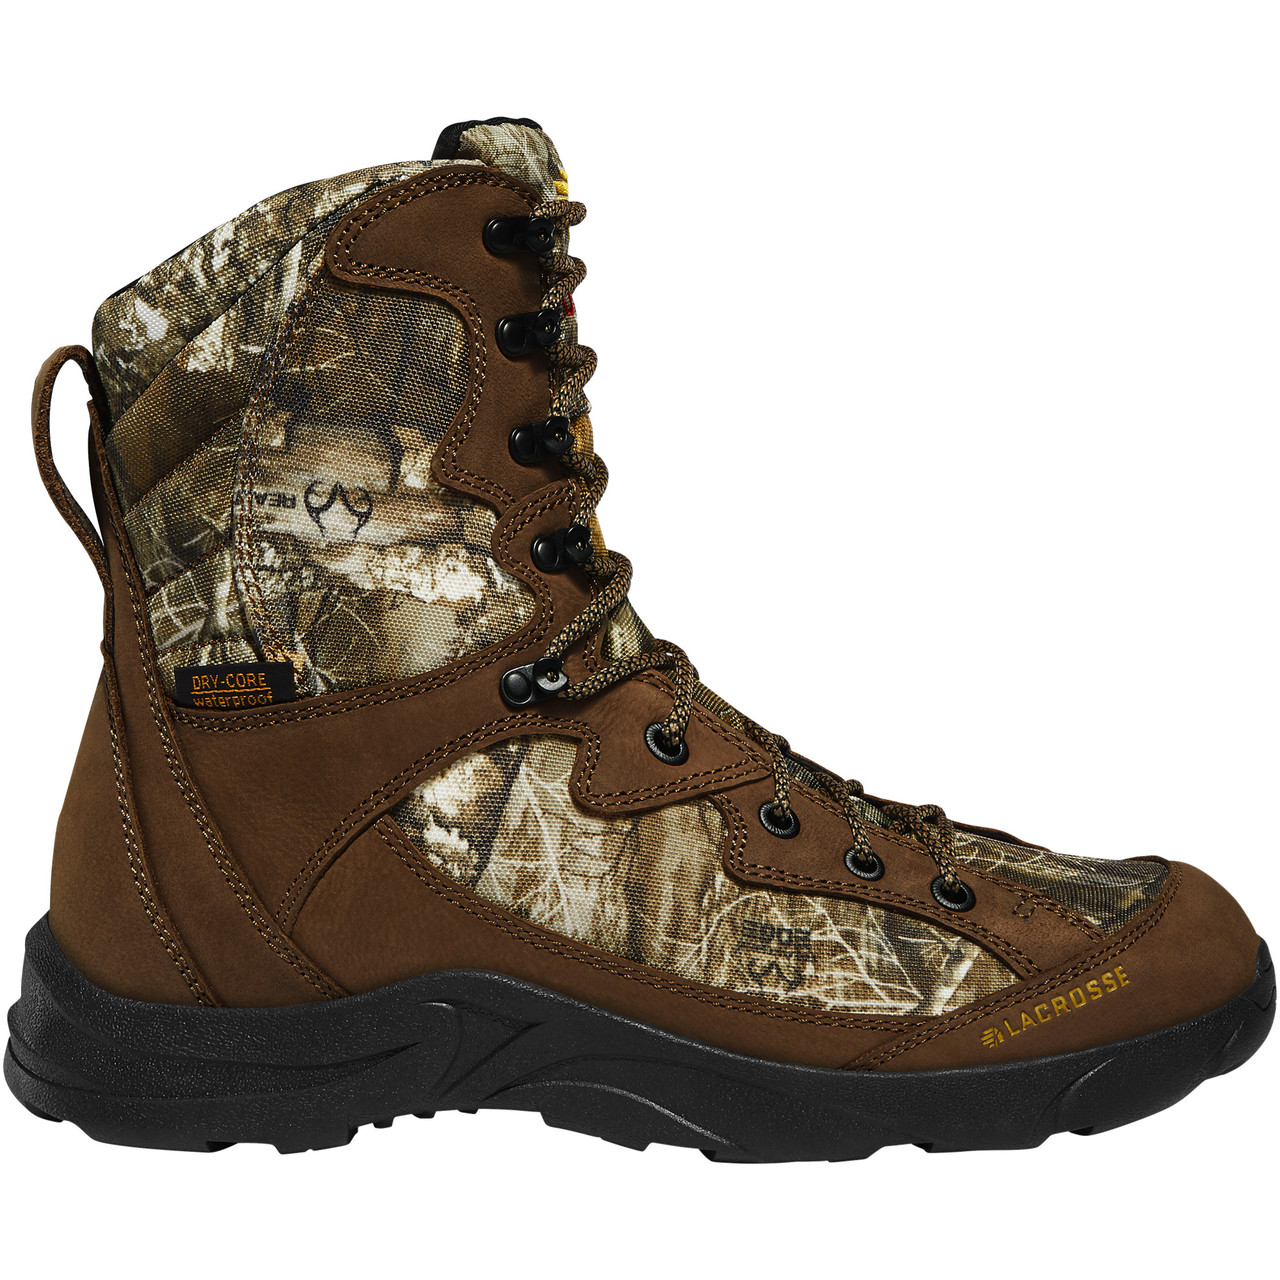 LACROSSE CLEAR SHOT 8" REALTREE EDGE 800G HUNT BOOTS 542162